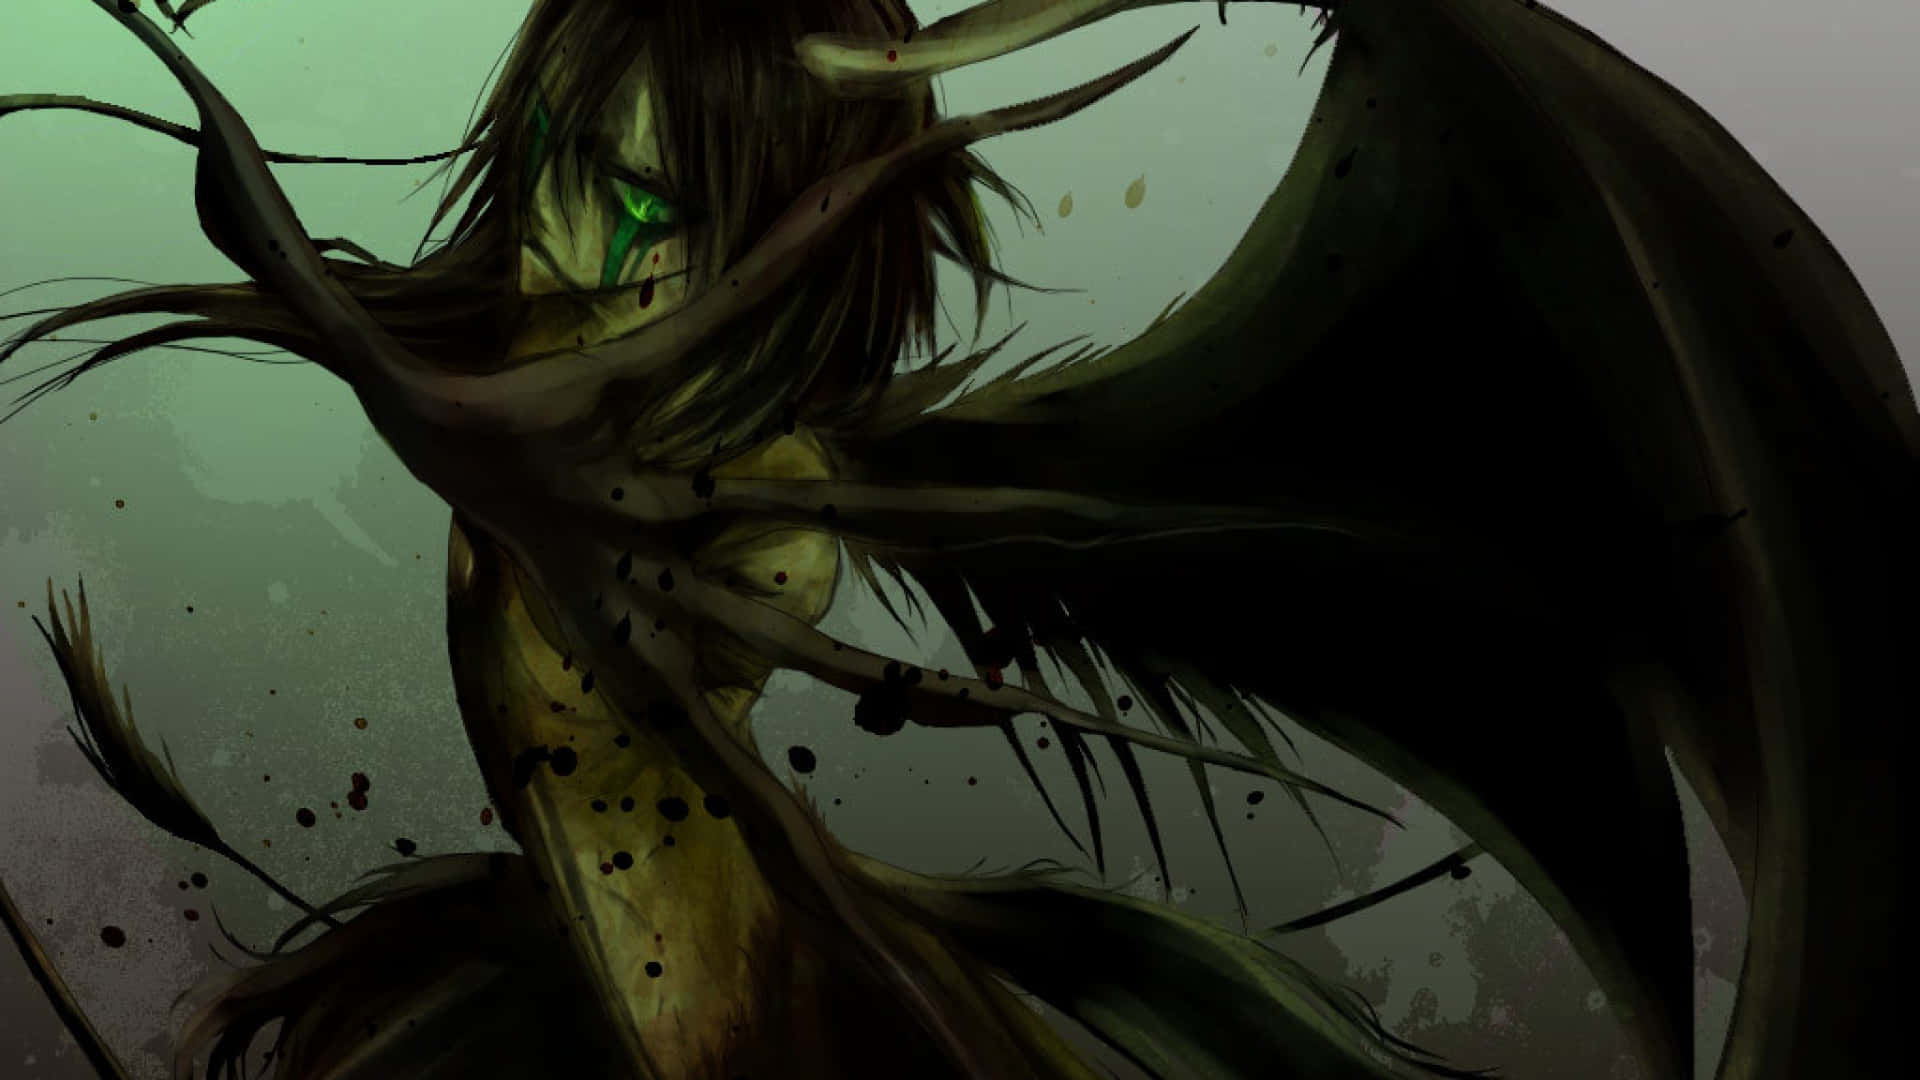 "The Hollow Hunting Apostle of Las Noches - Ulquiorra Cifer" Wallpaper